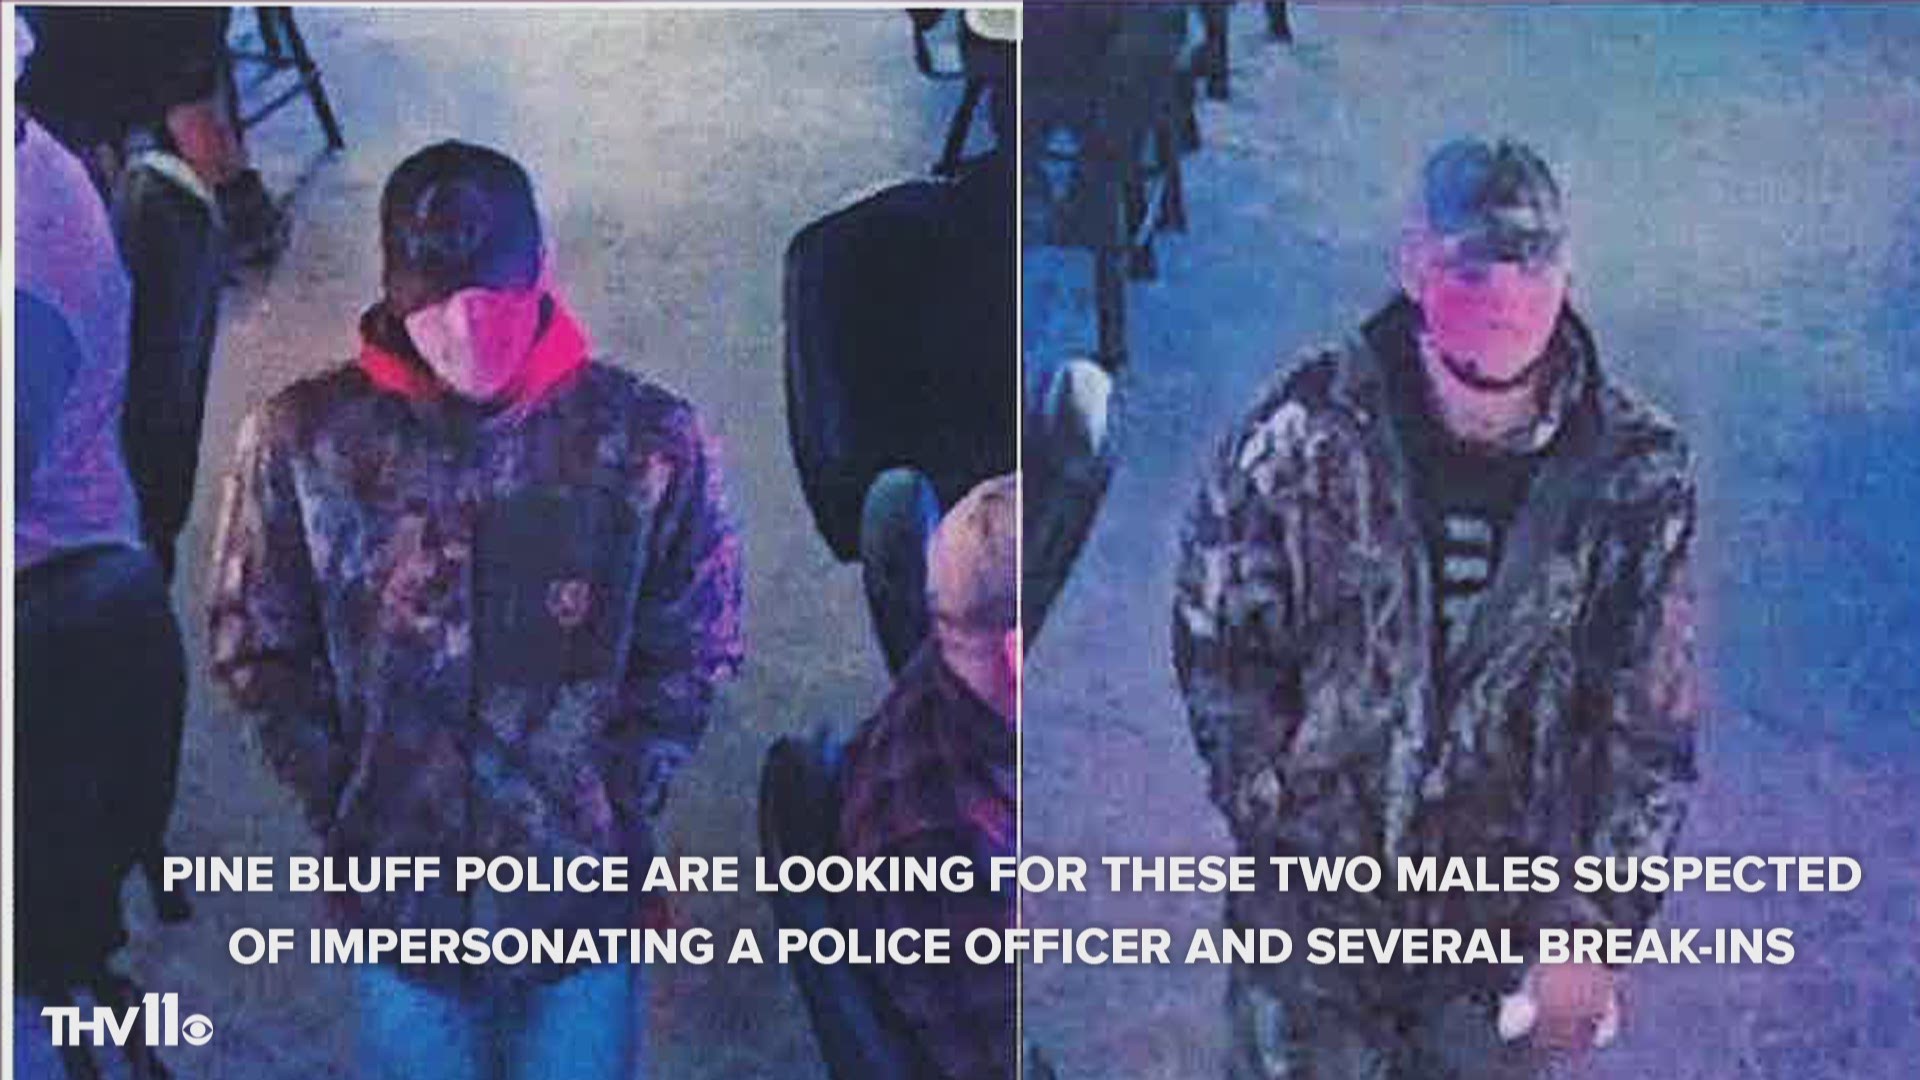 Pine Bluff police are looking for two male suspects seen impersonating a police officer.